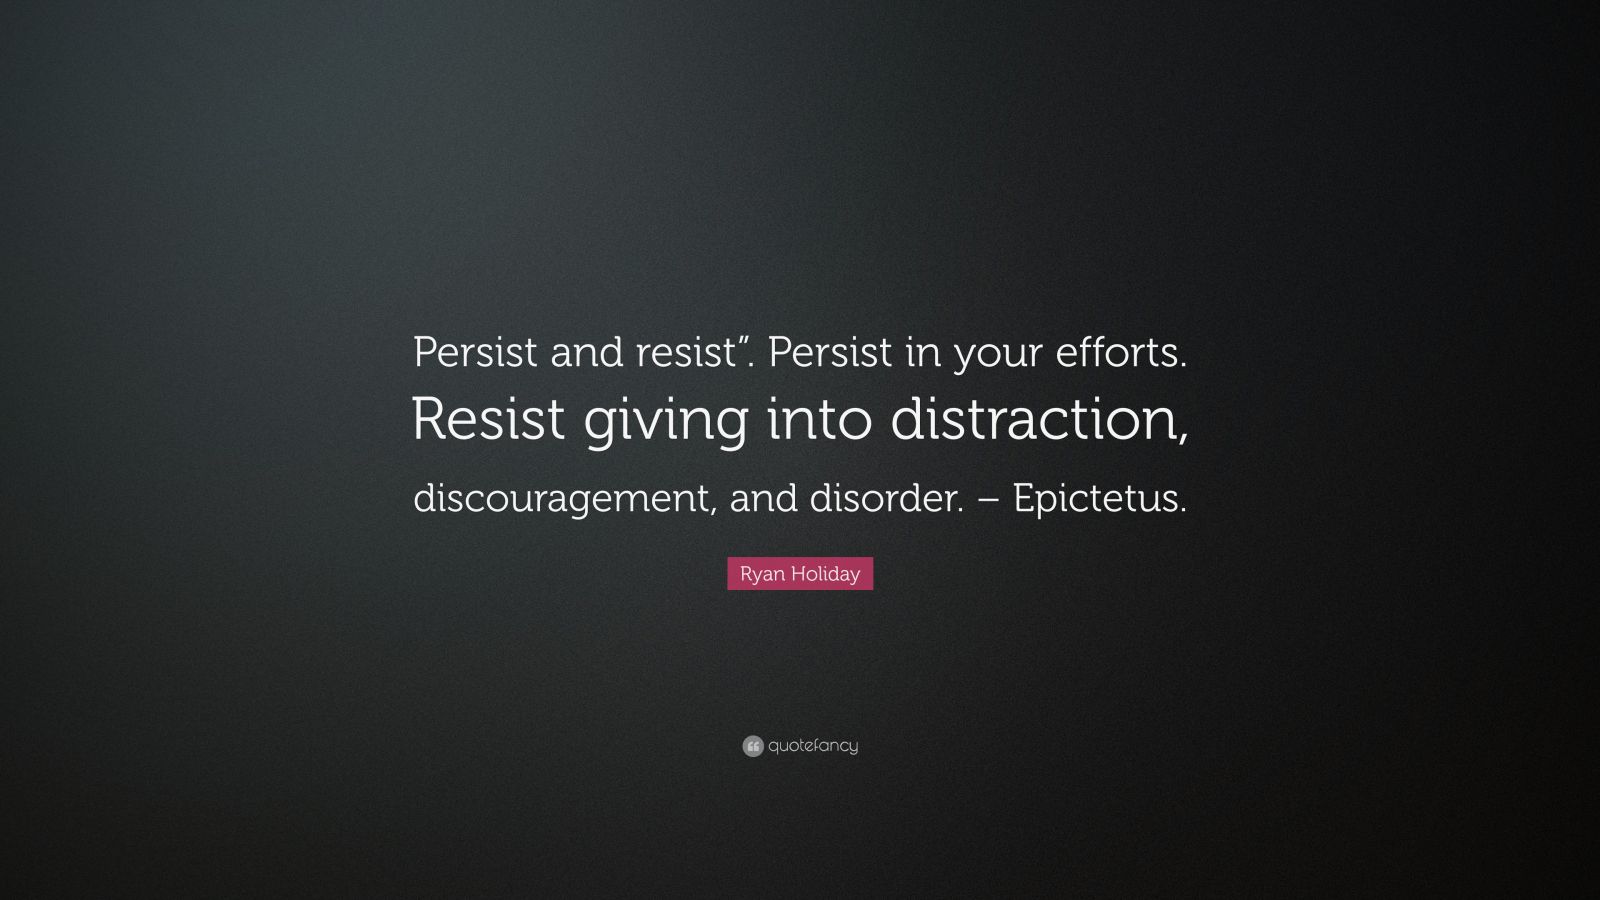 Ryan Holiday Quote: “Persist and resist”. Persist in your efforts ...